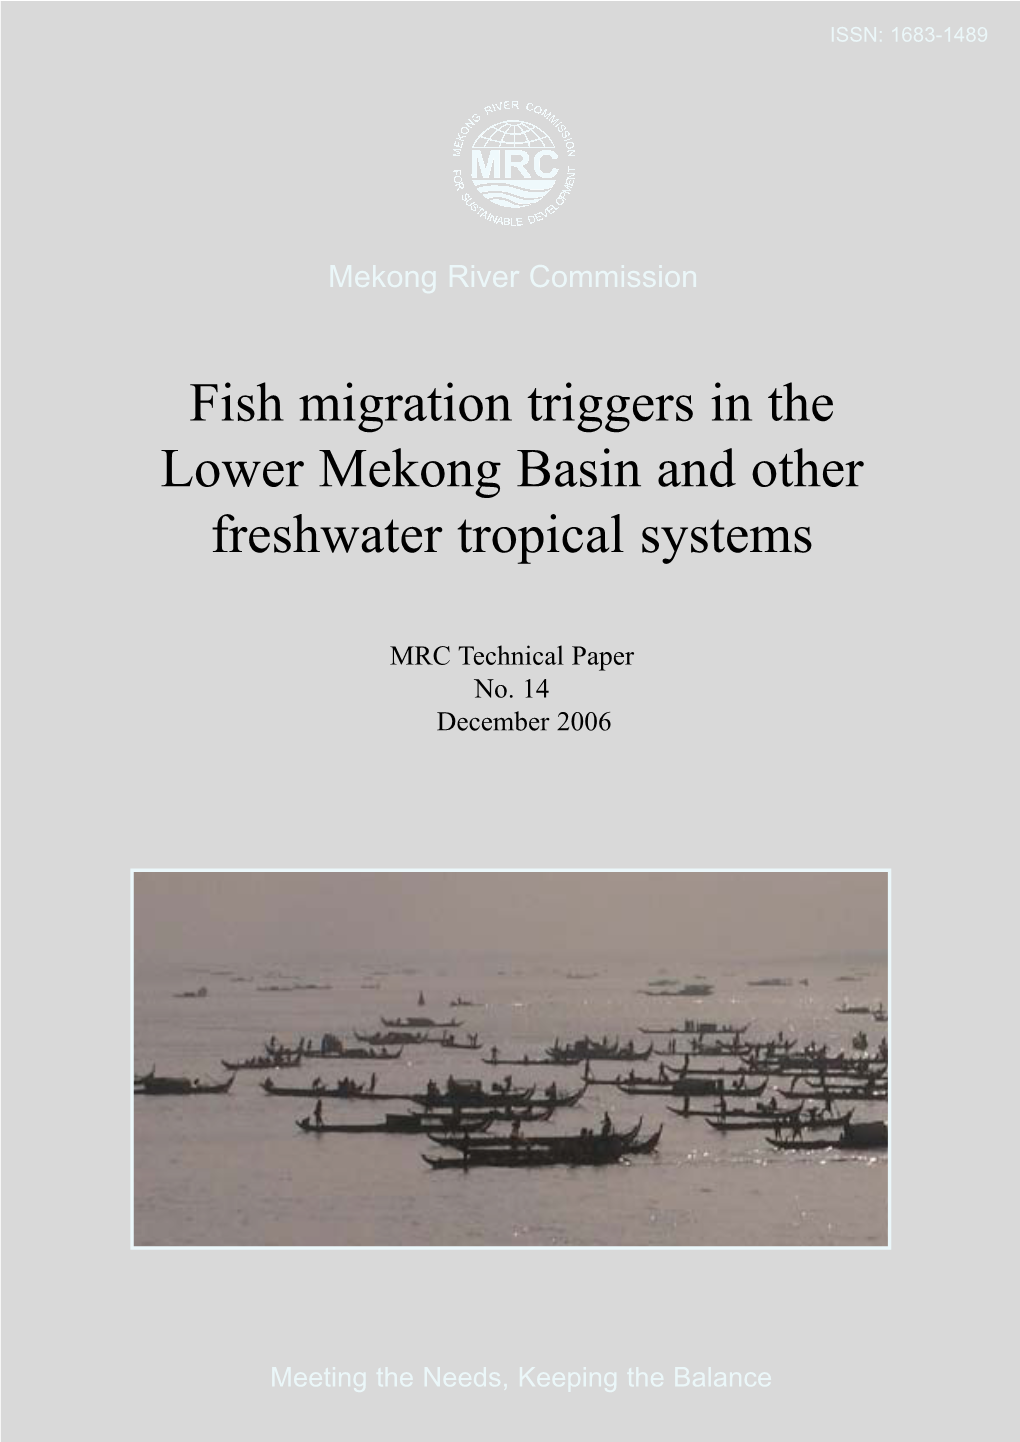 Fish Migration Triggers in the Lower Mekong Basin and Other Freshwater Tropical Systems